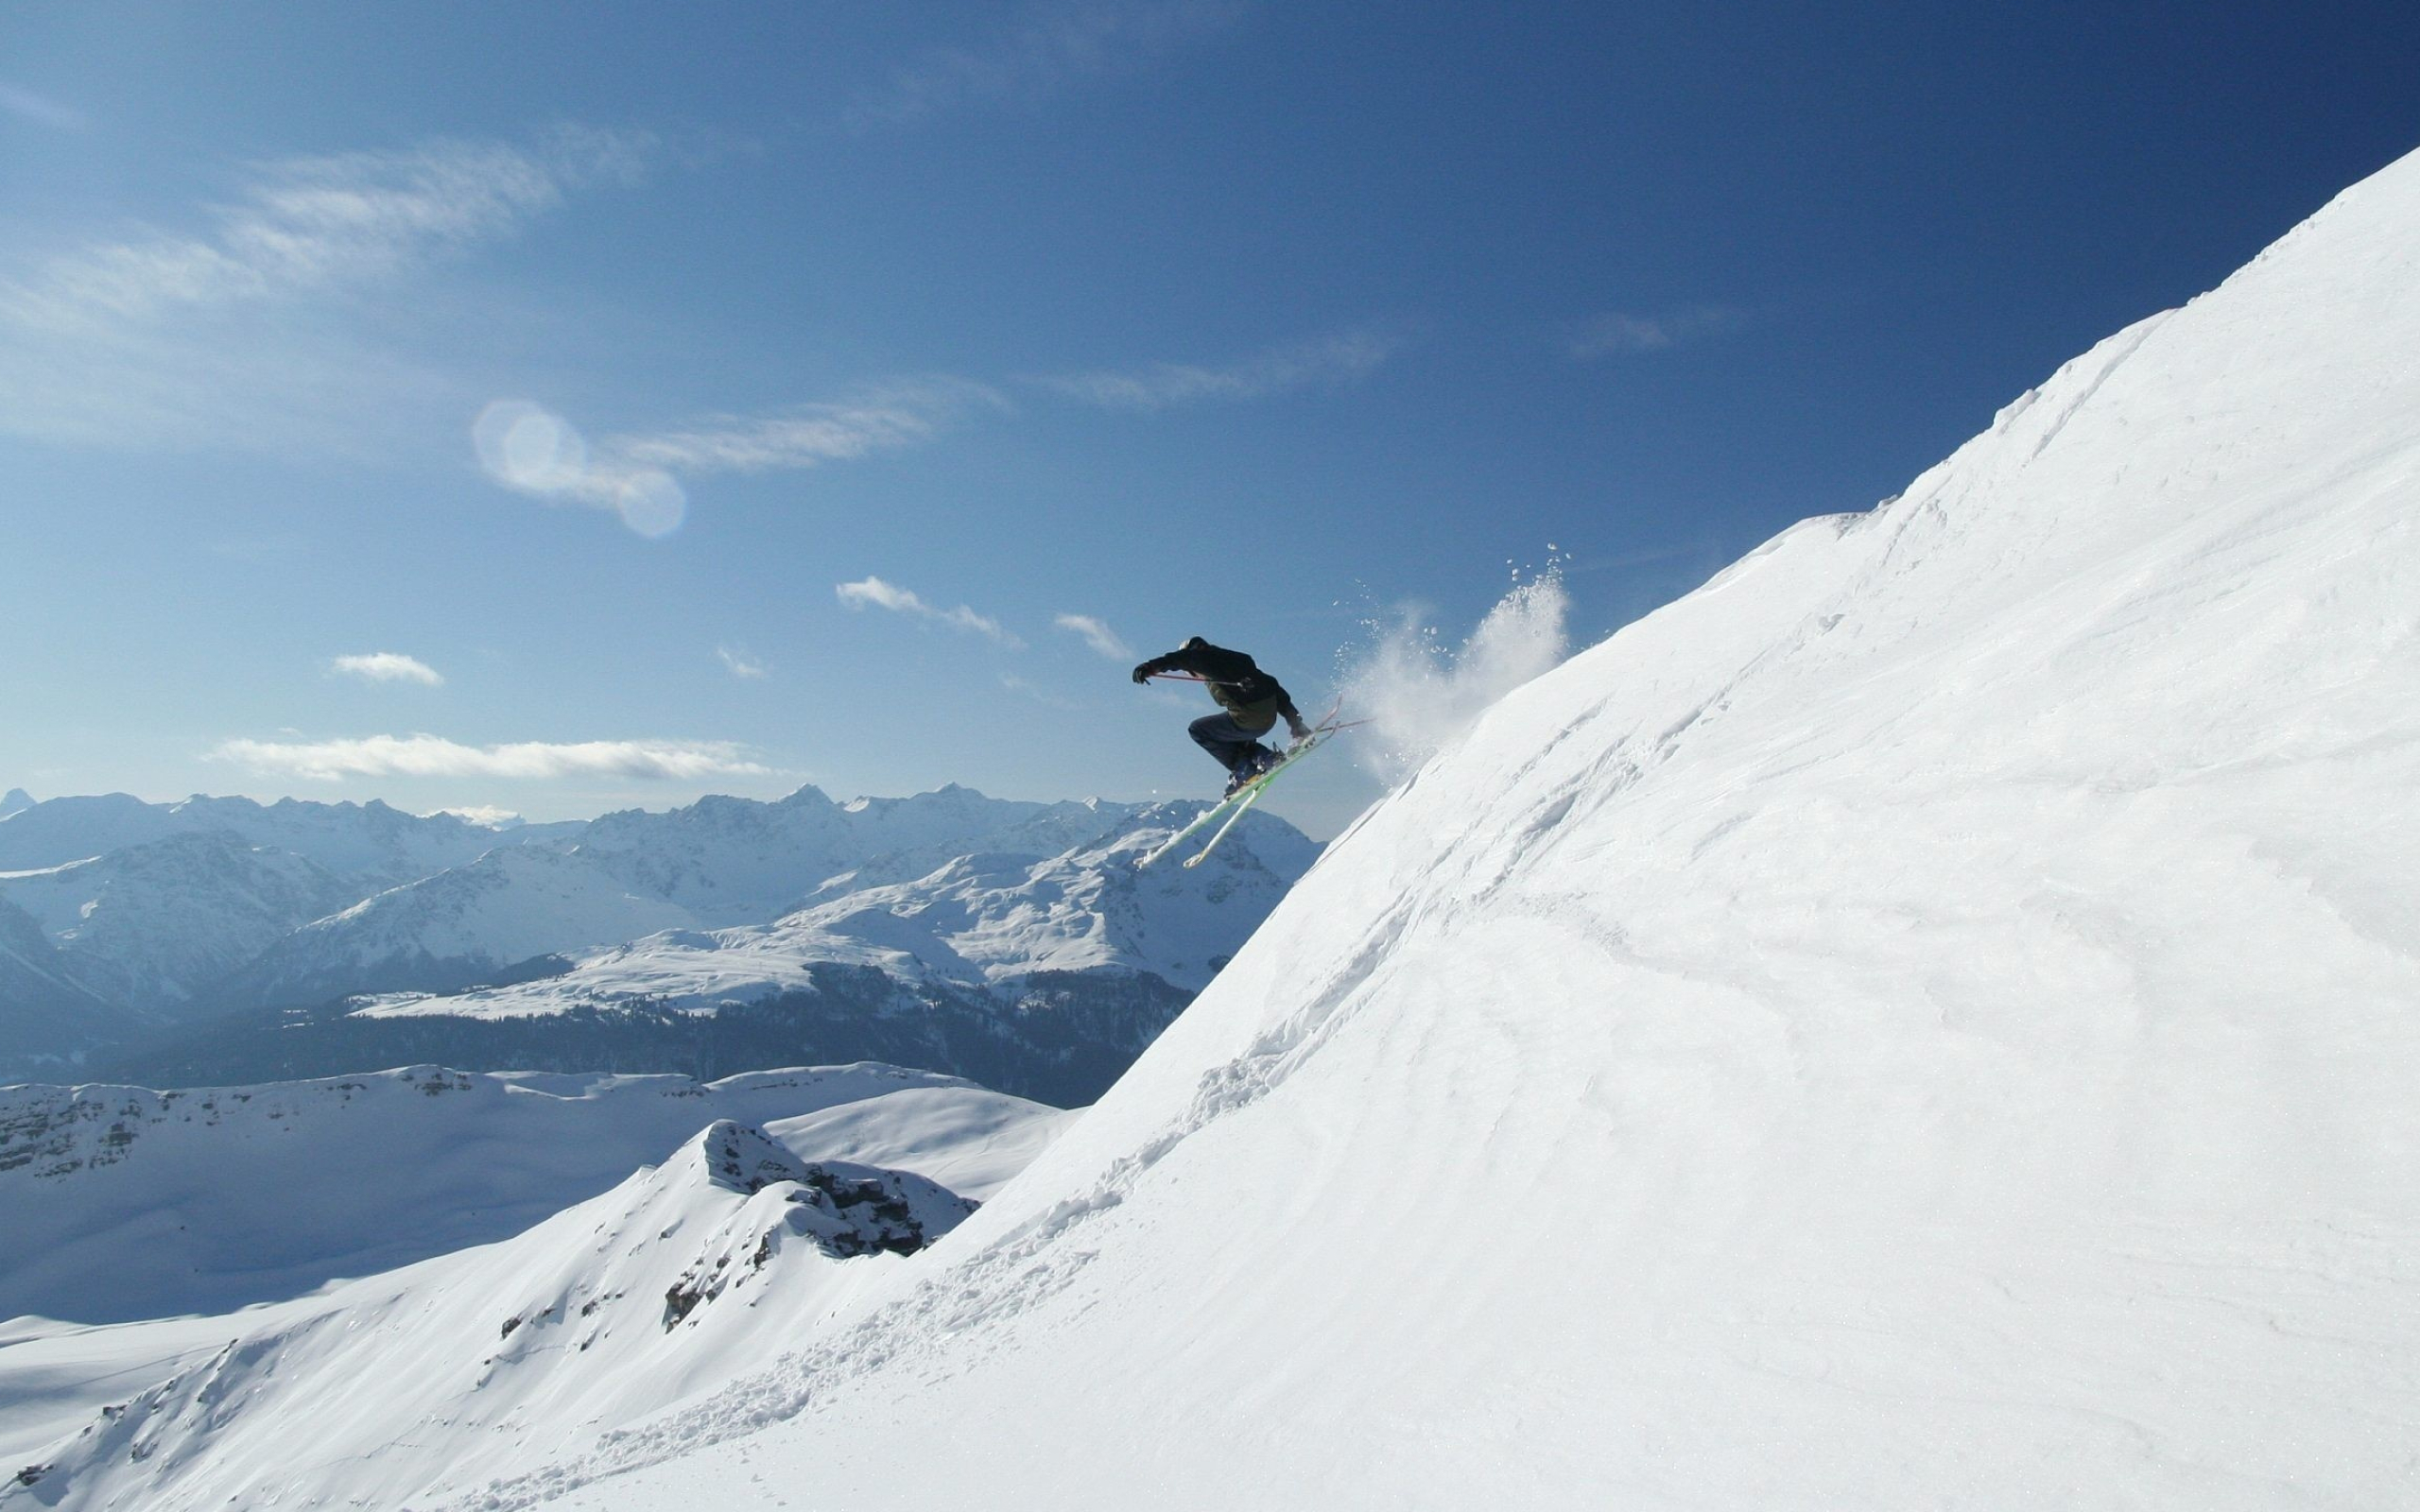 Skiing: Downhill, Cross-country, Winter sports, Slalom, Freestyle sports on skis. 2560x1600 HD Wallpaper.